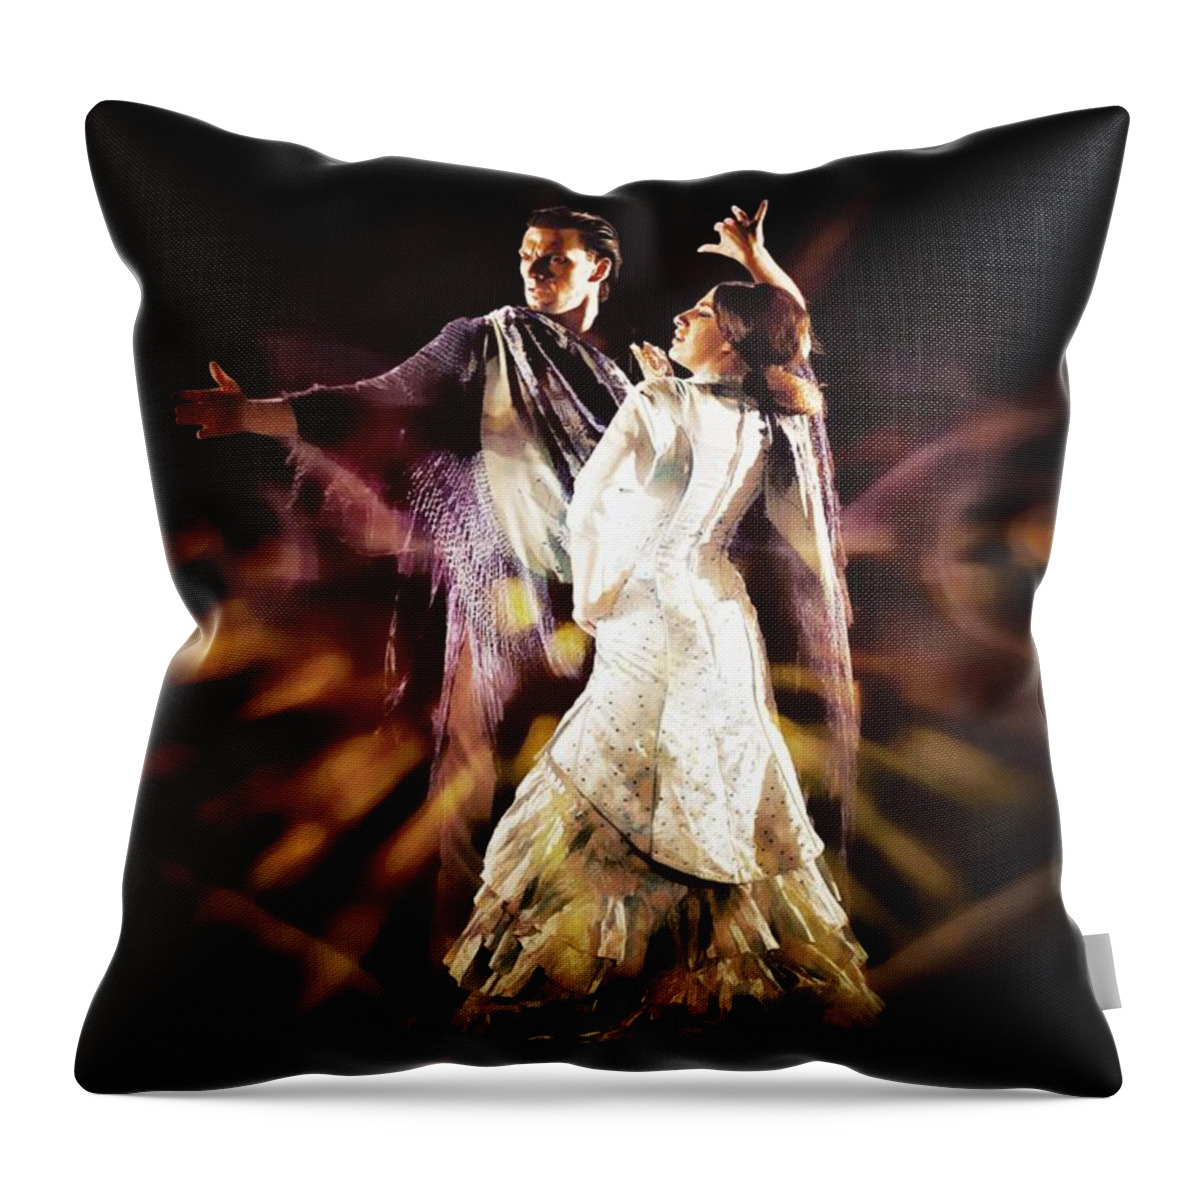 Flamenco Throw Pillow featuring the photograph Flamenco Performance by Jean Francois Gil